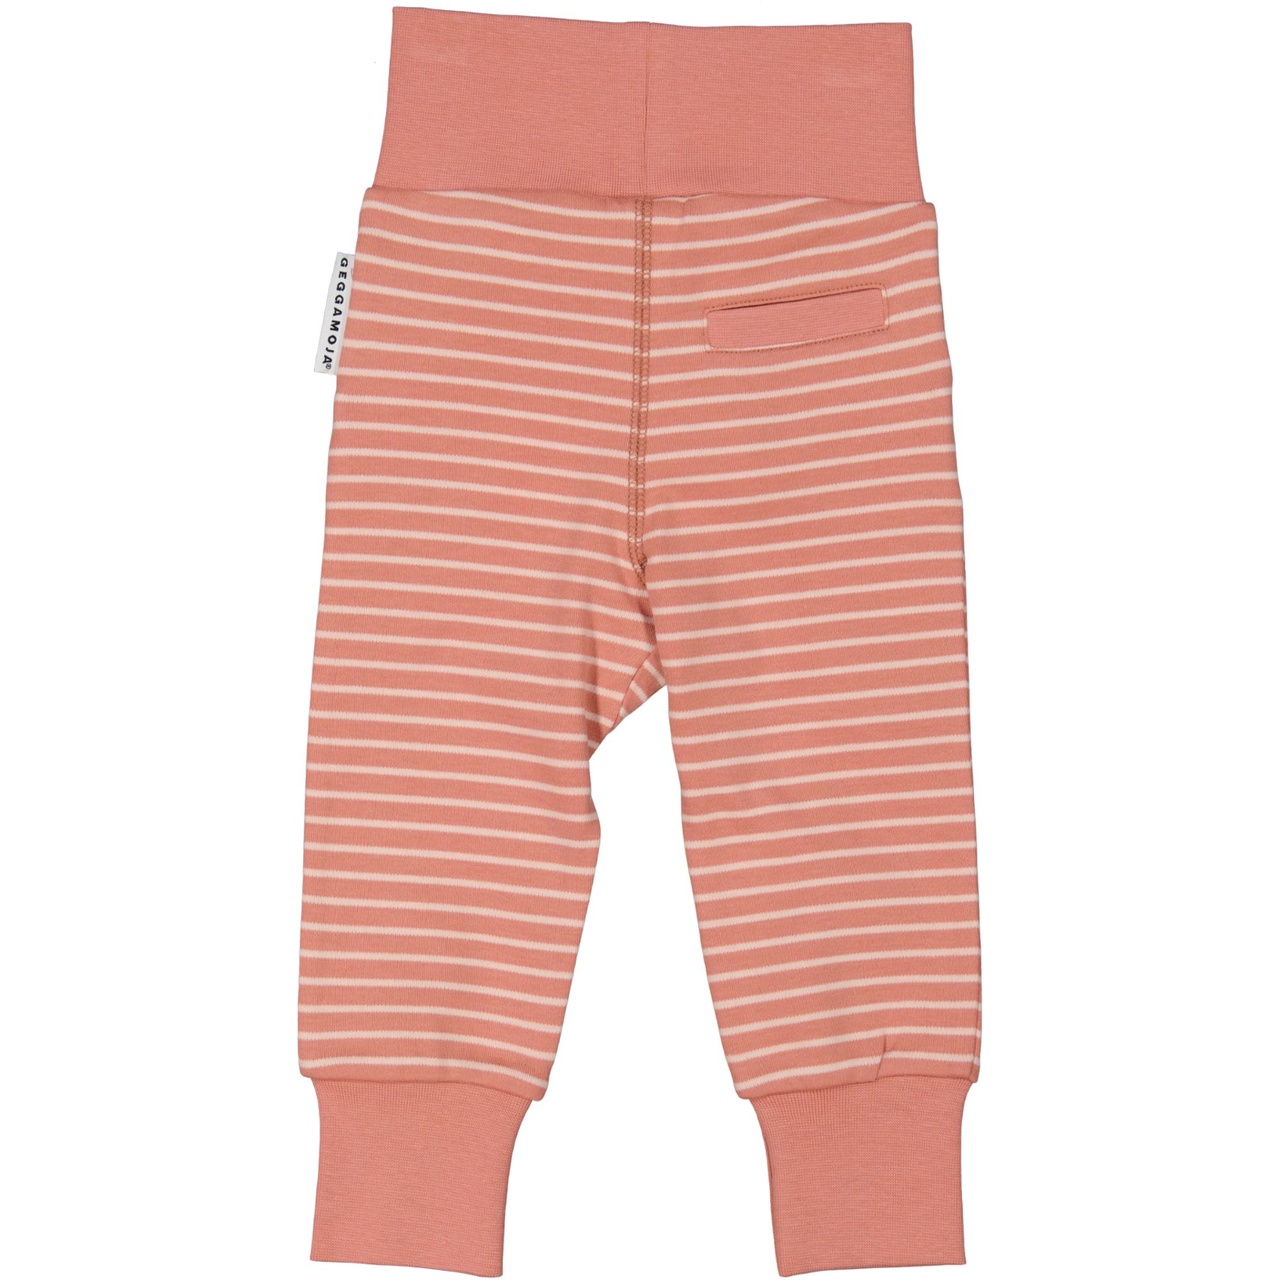 Baby trouser D.pink/pink 98/104